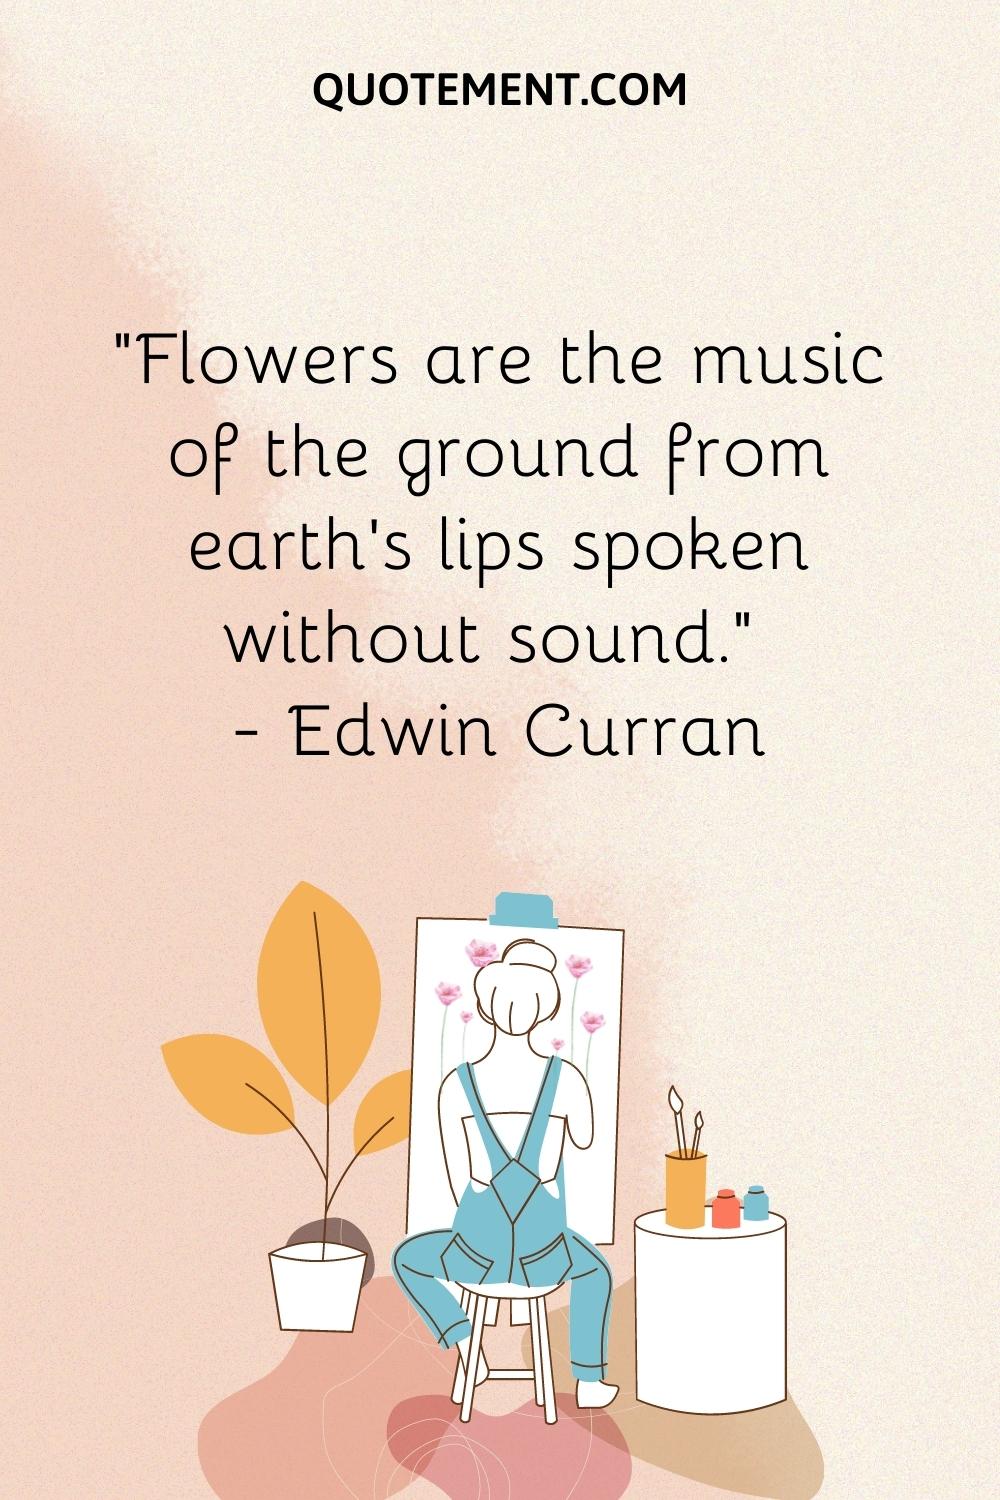 flowers are the music of the ground from earth's lips spoken without sound